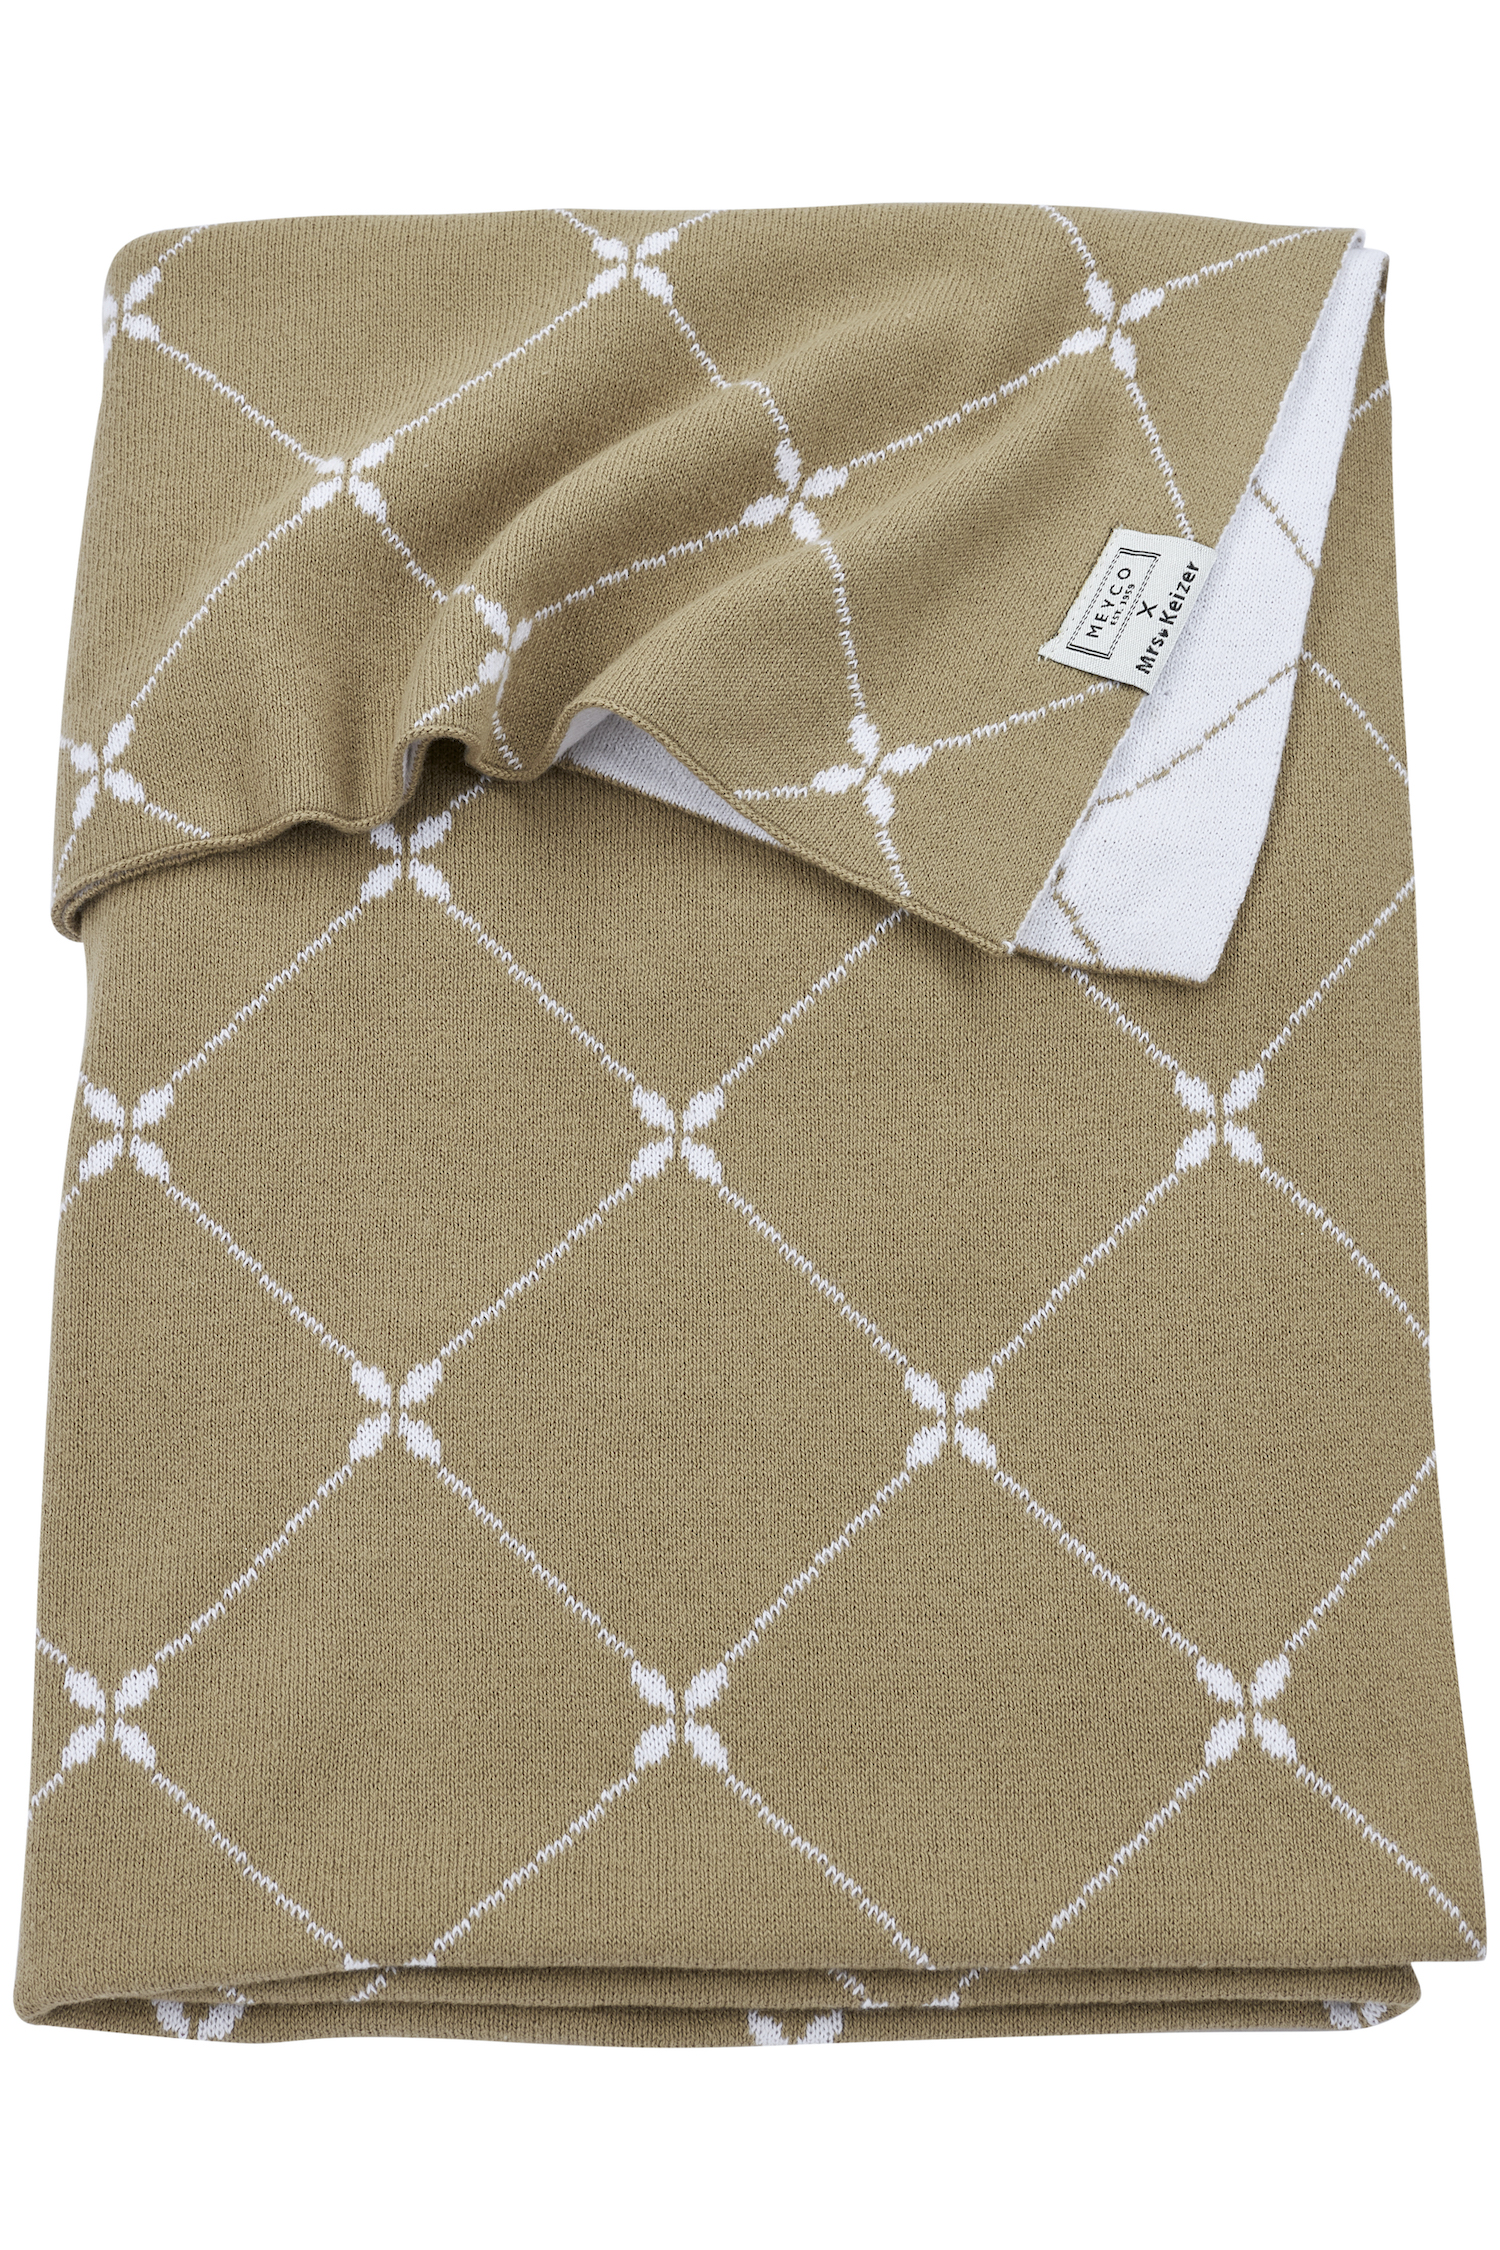 Cot bed blanket Louis - taupe - 100x150cm